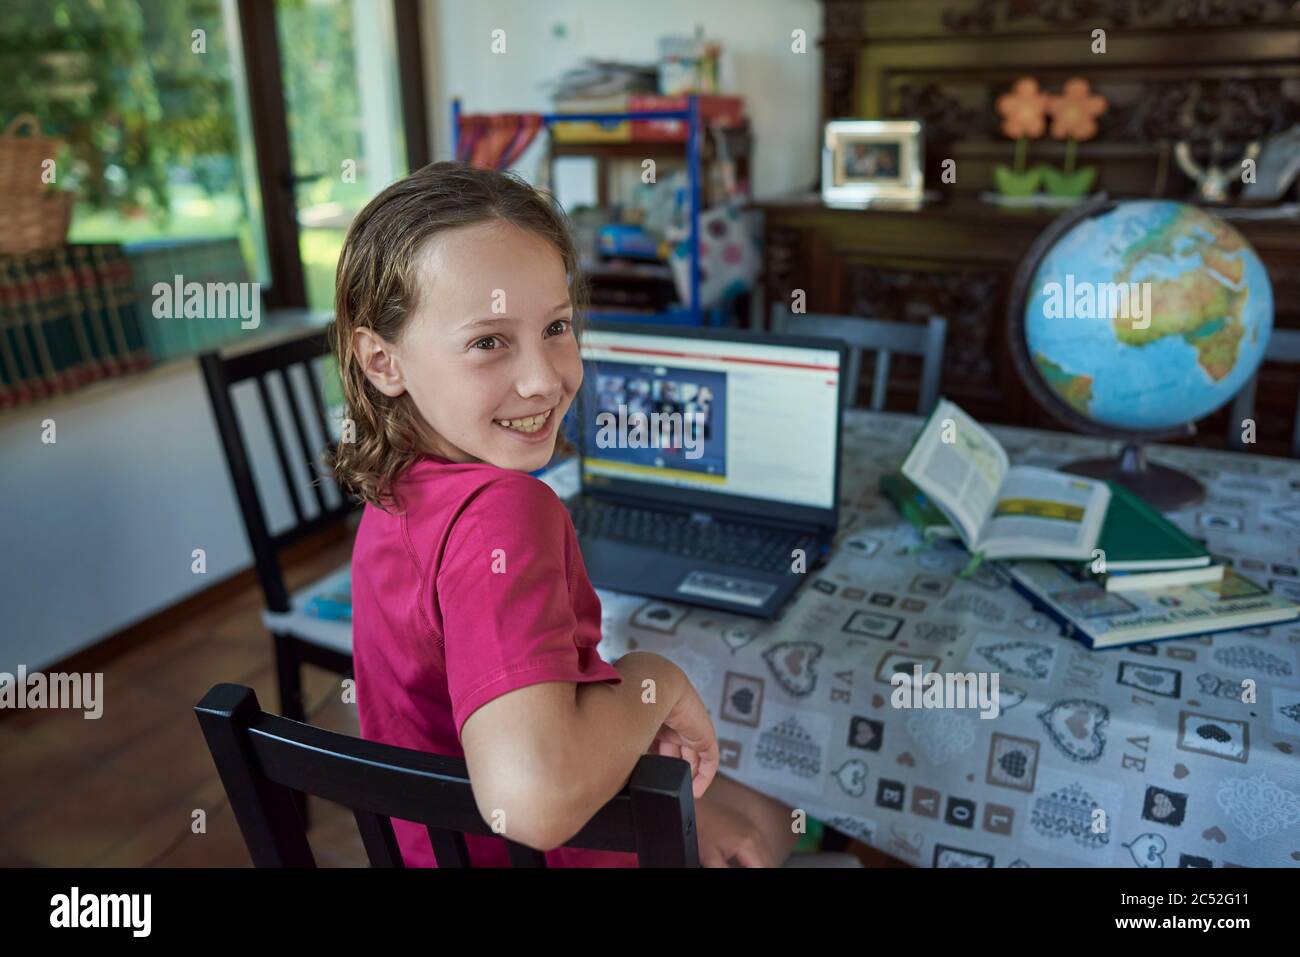 Girl smiling infront of the laptop at her home Stock Photo